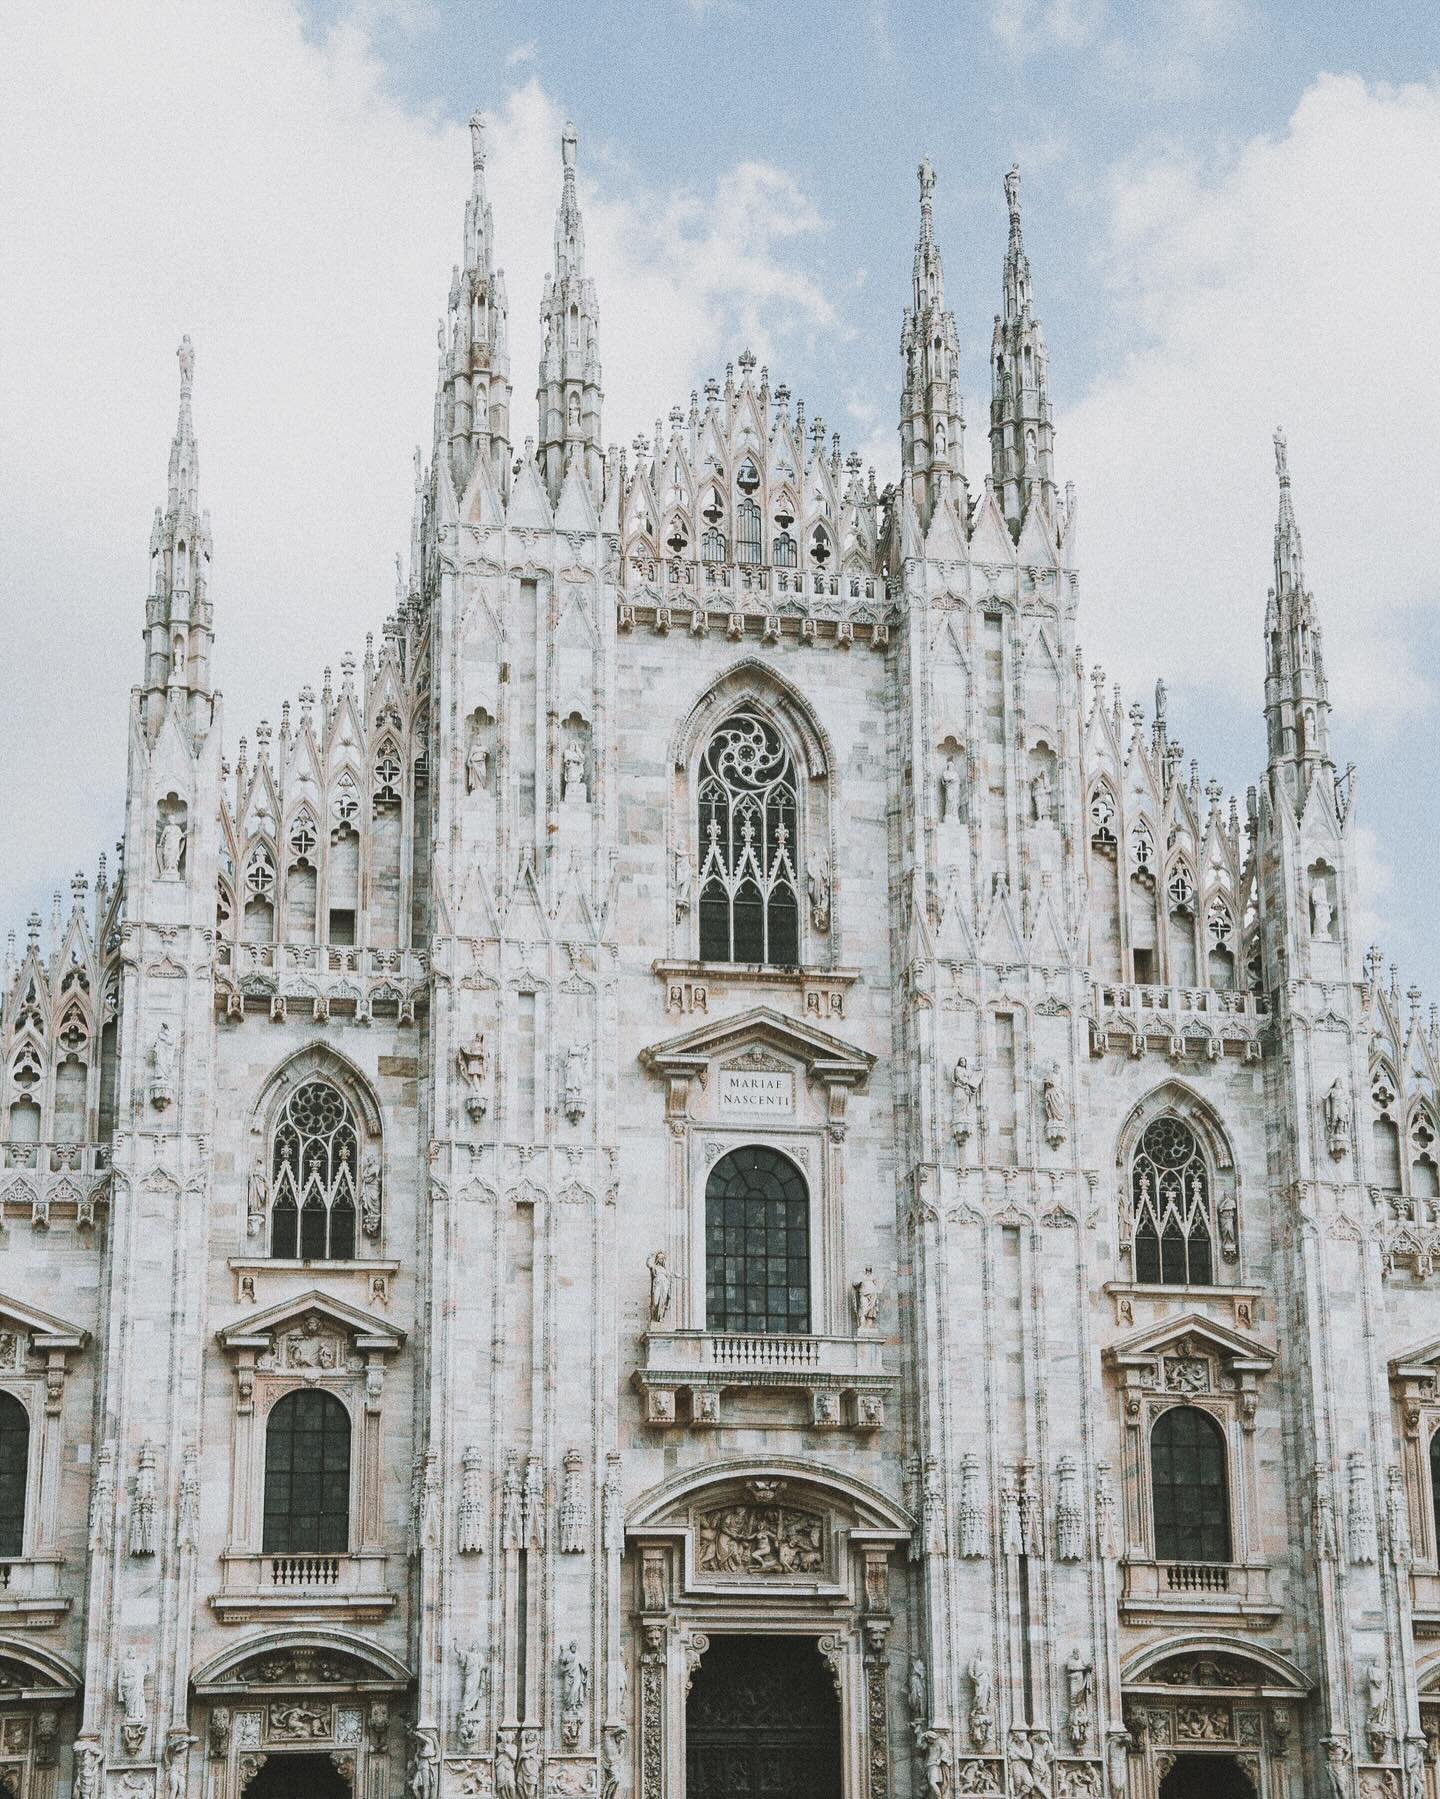 24 Hours in Milan 🇮🇹

A city of history, design, art, and espresso ☕️ 

From the duomo to via Mozart. From fiori markets and book stands. From medieval art and the last supper. Milan was a kaleidoscope of colors, eras, and dolce. 🗺️ 

Top 5 Favori